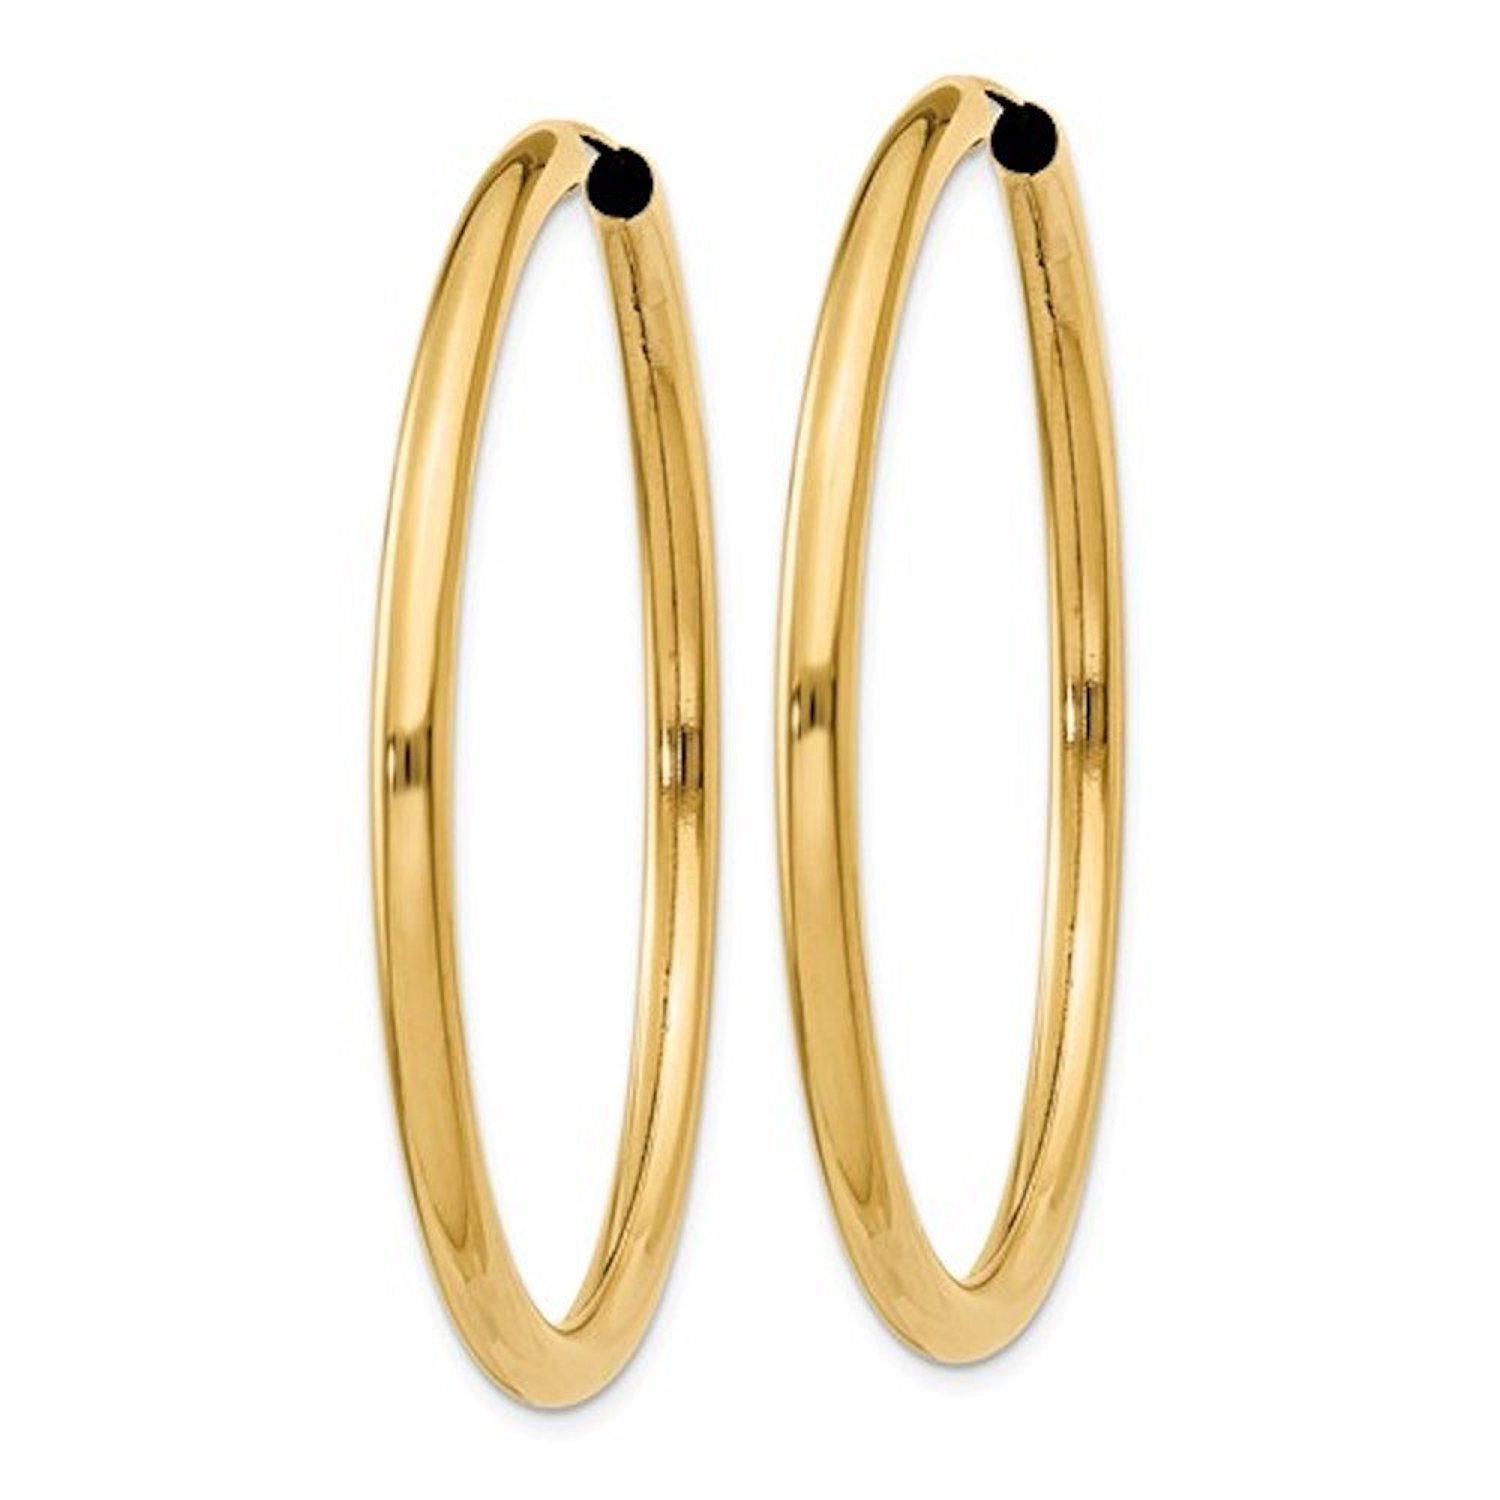 14K Yellow Gold Large Endless Round Hoop Earrings 45mmx2.75mm